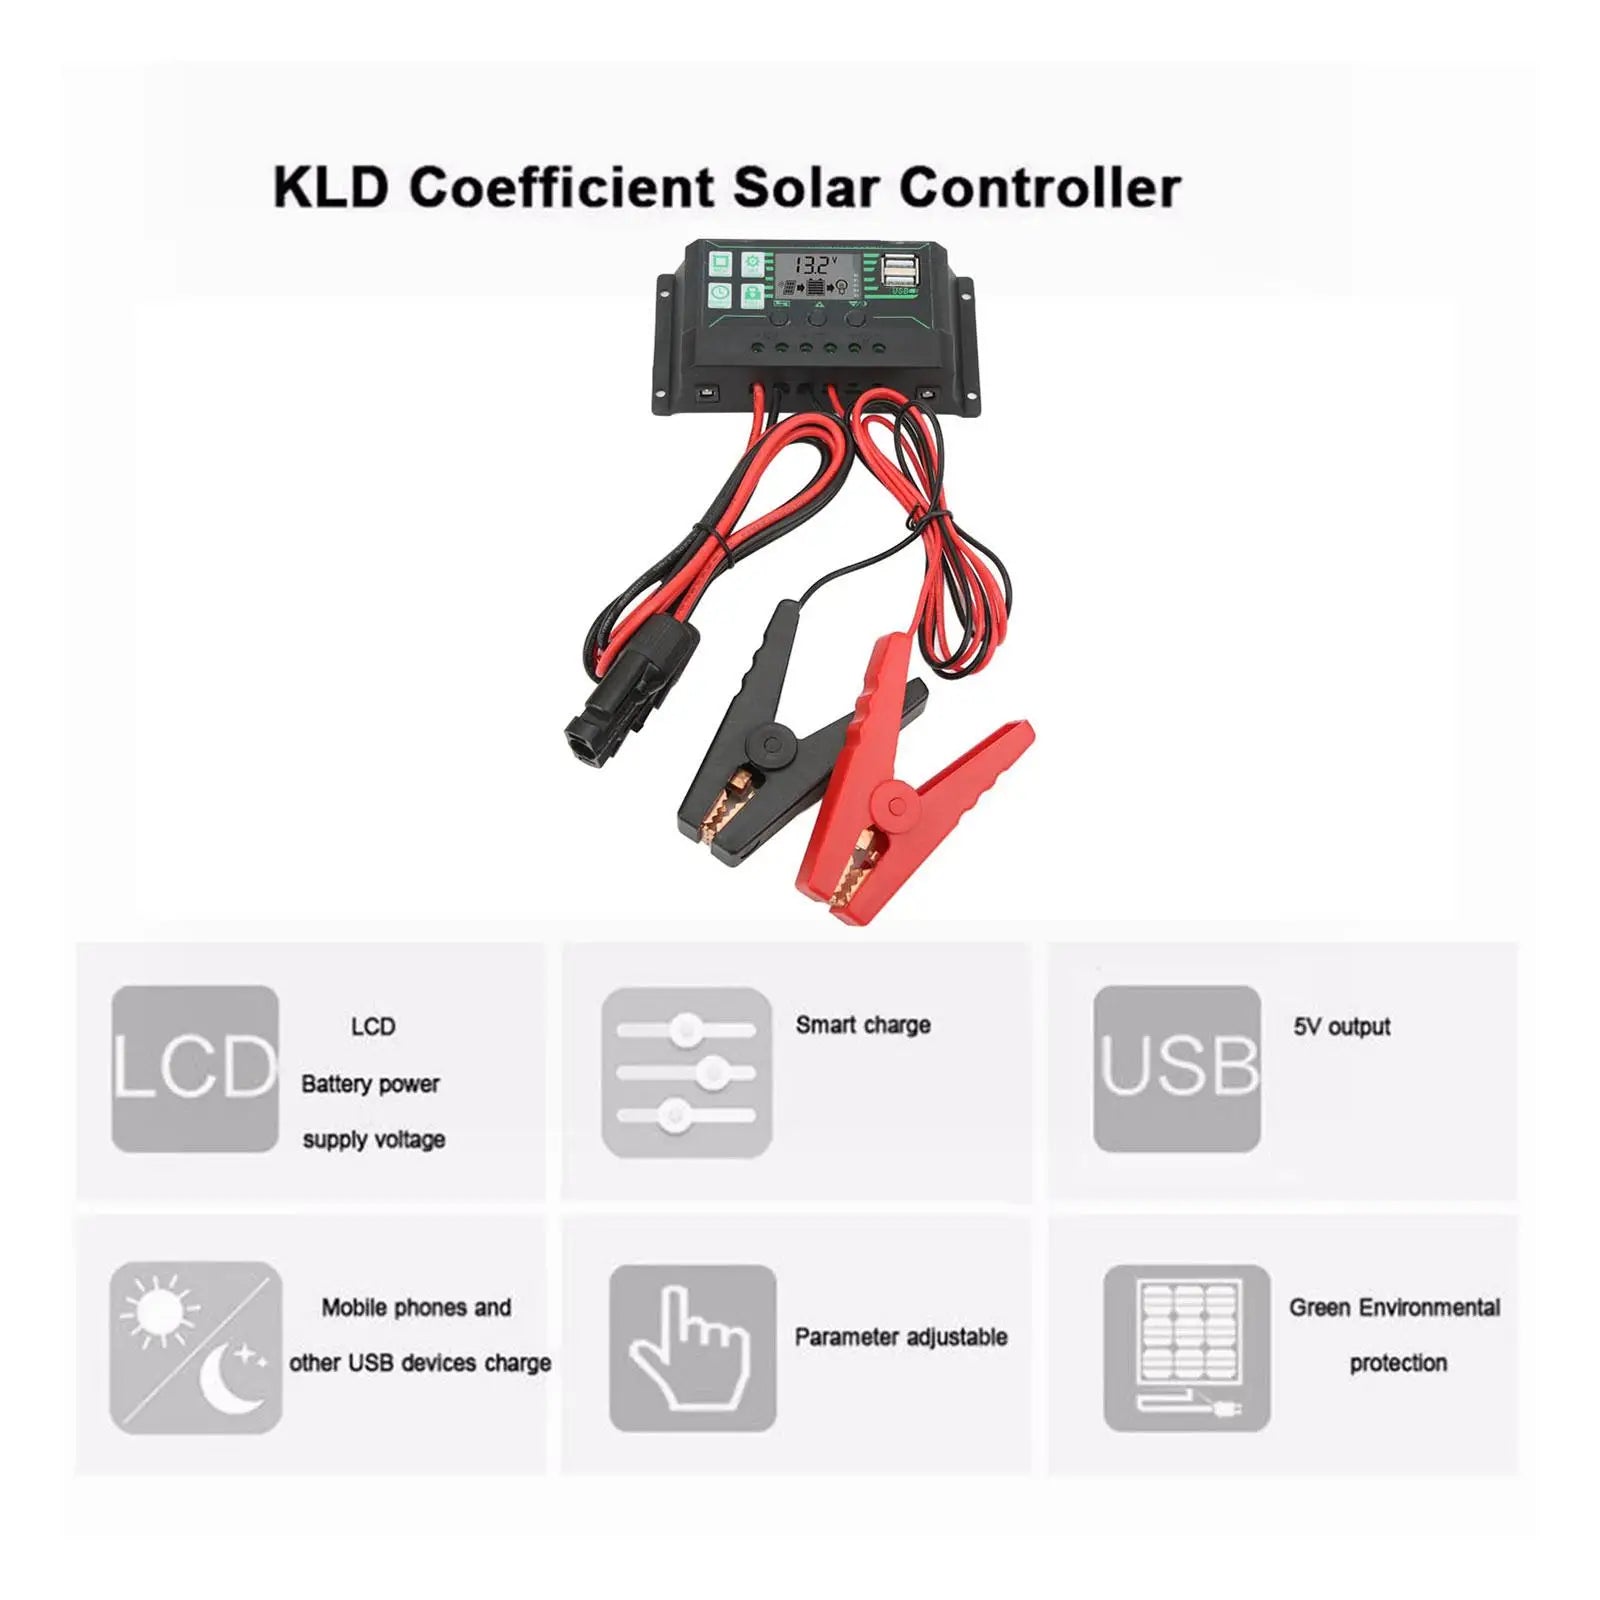 MPPT 10/20/30/60/100A Solar Charge Controller, Smart solar controller with LCD display and USB output for charging mobile devices.